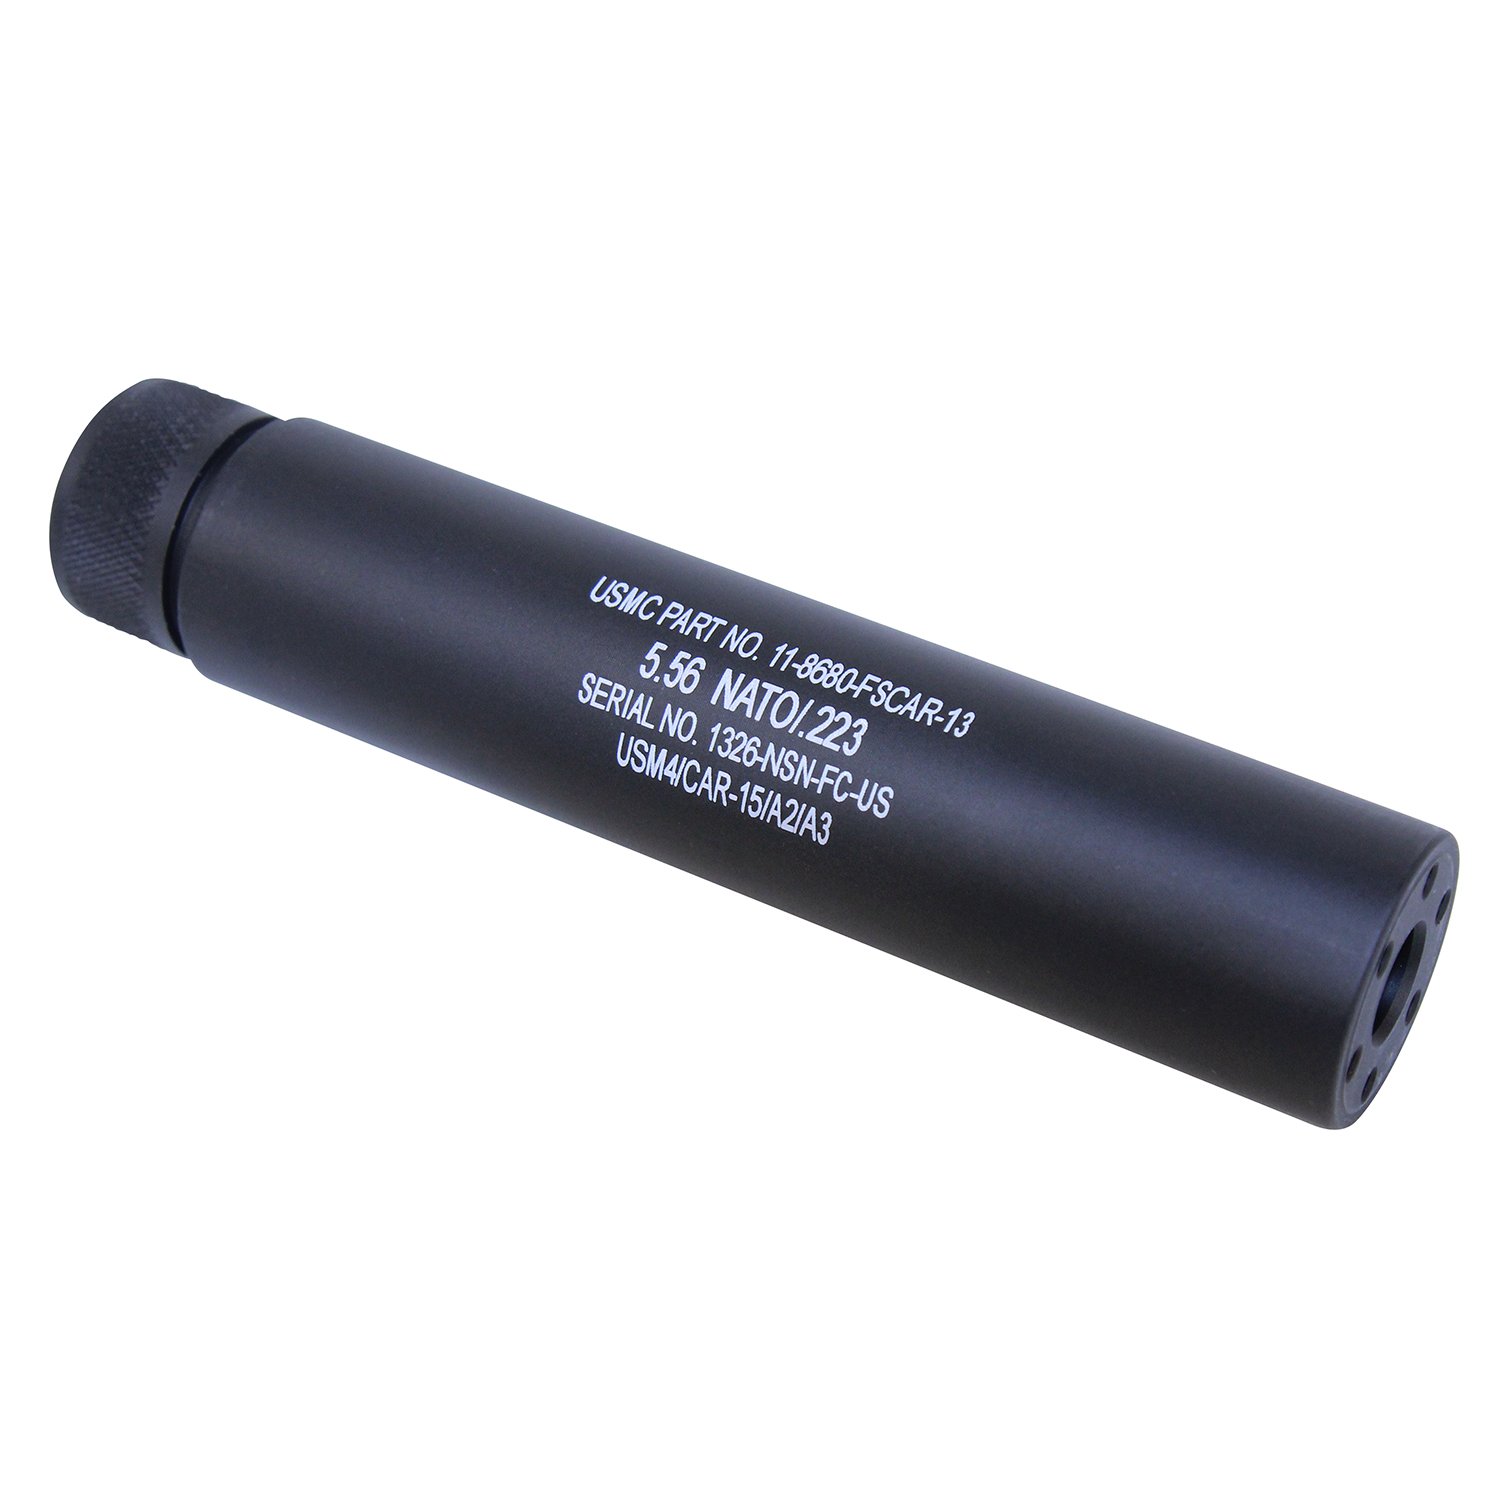 AR-15 mock suppressor, 6-inch length in black, with detailed engraving.